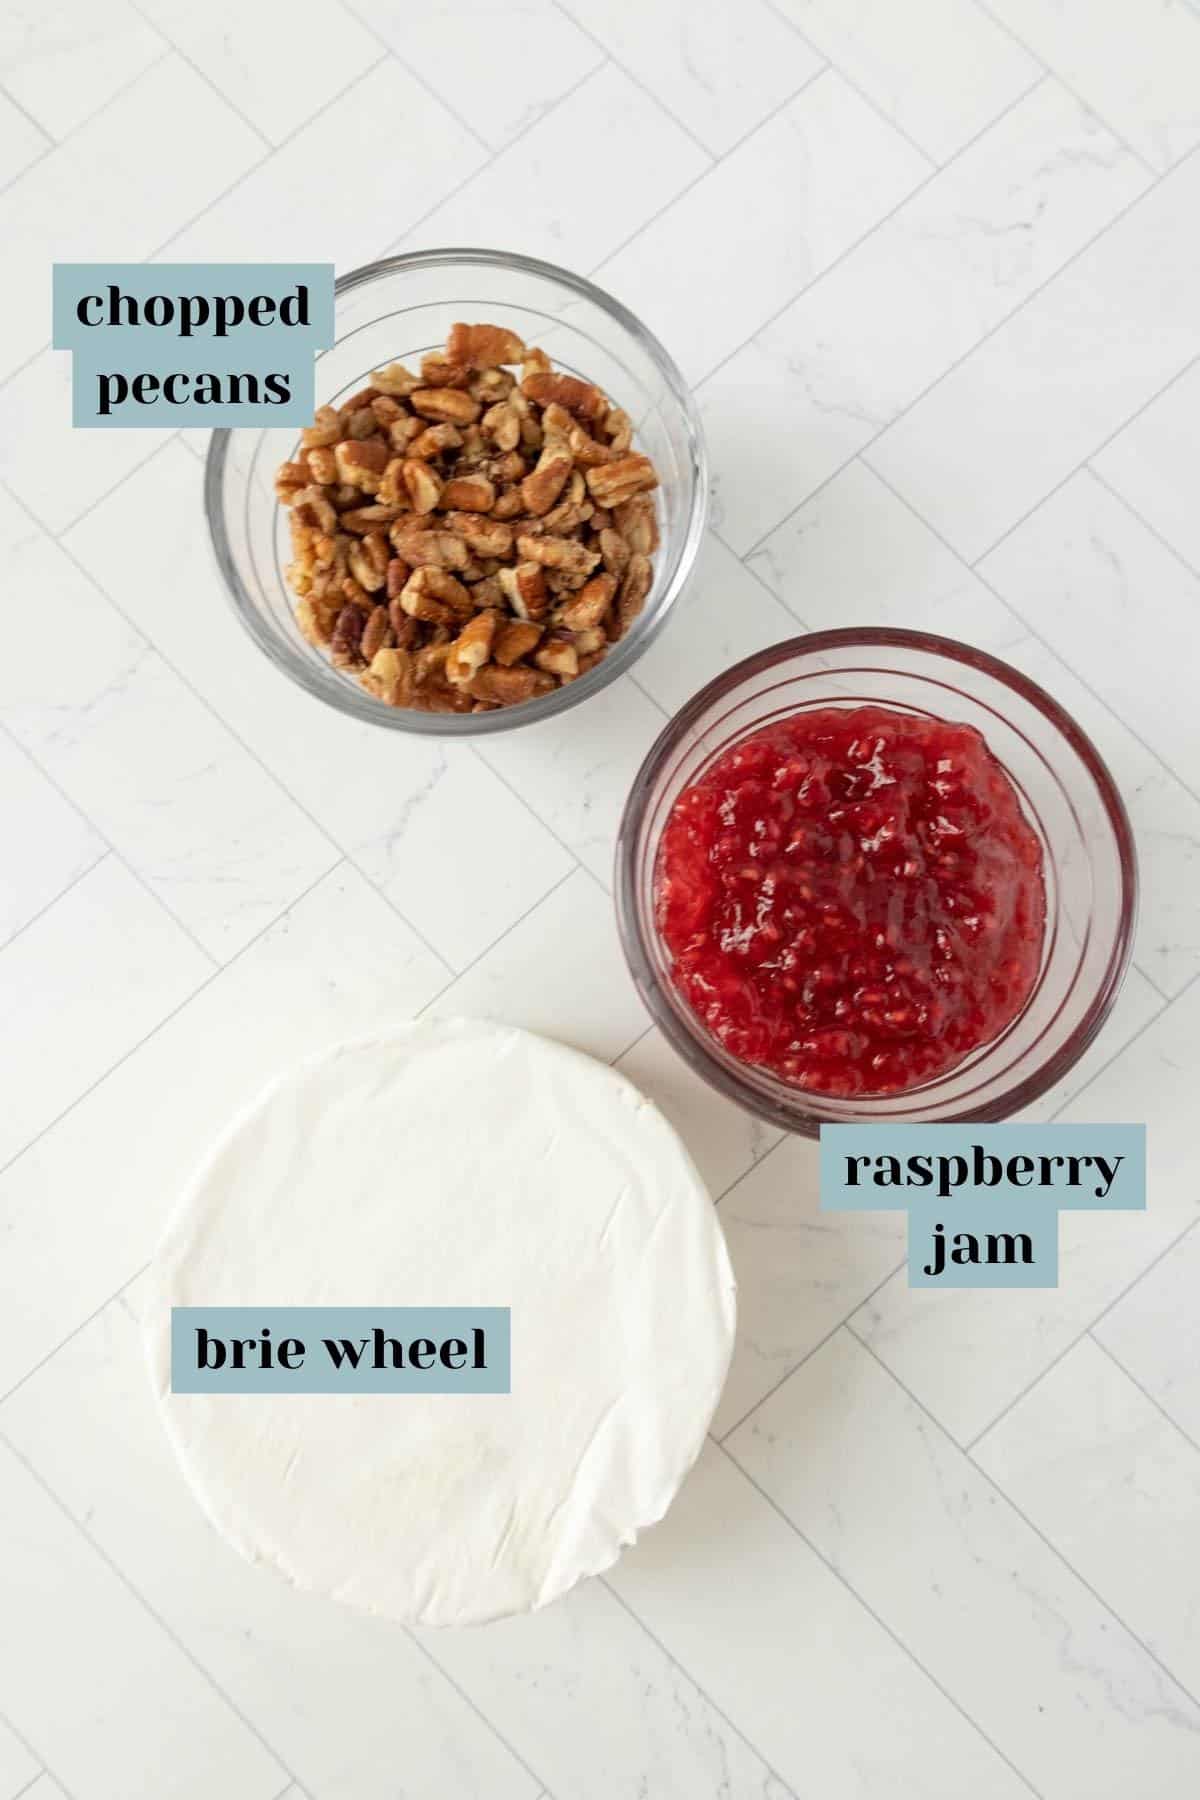 The ingredients for a baked brie with jam and pecans.